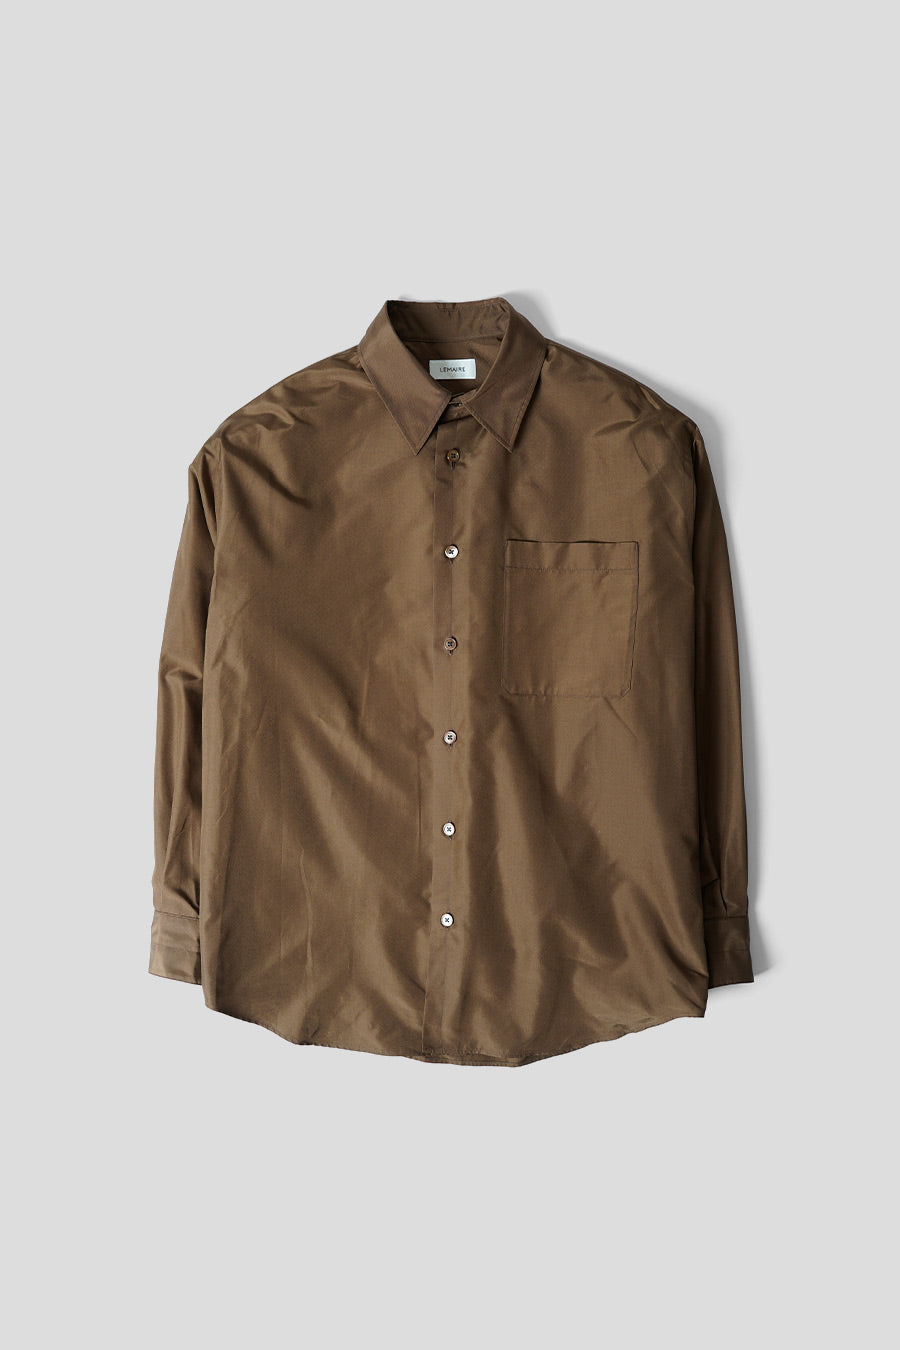 LEMAIRE - BROWN CASUAL SHIRT - LE LABO STORE